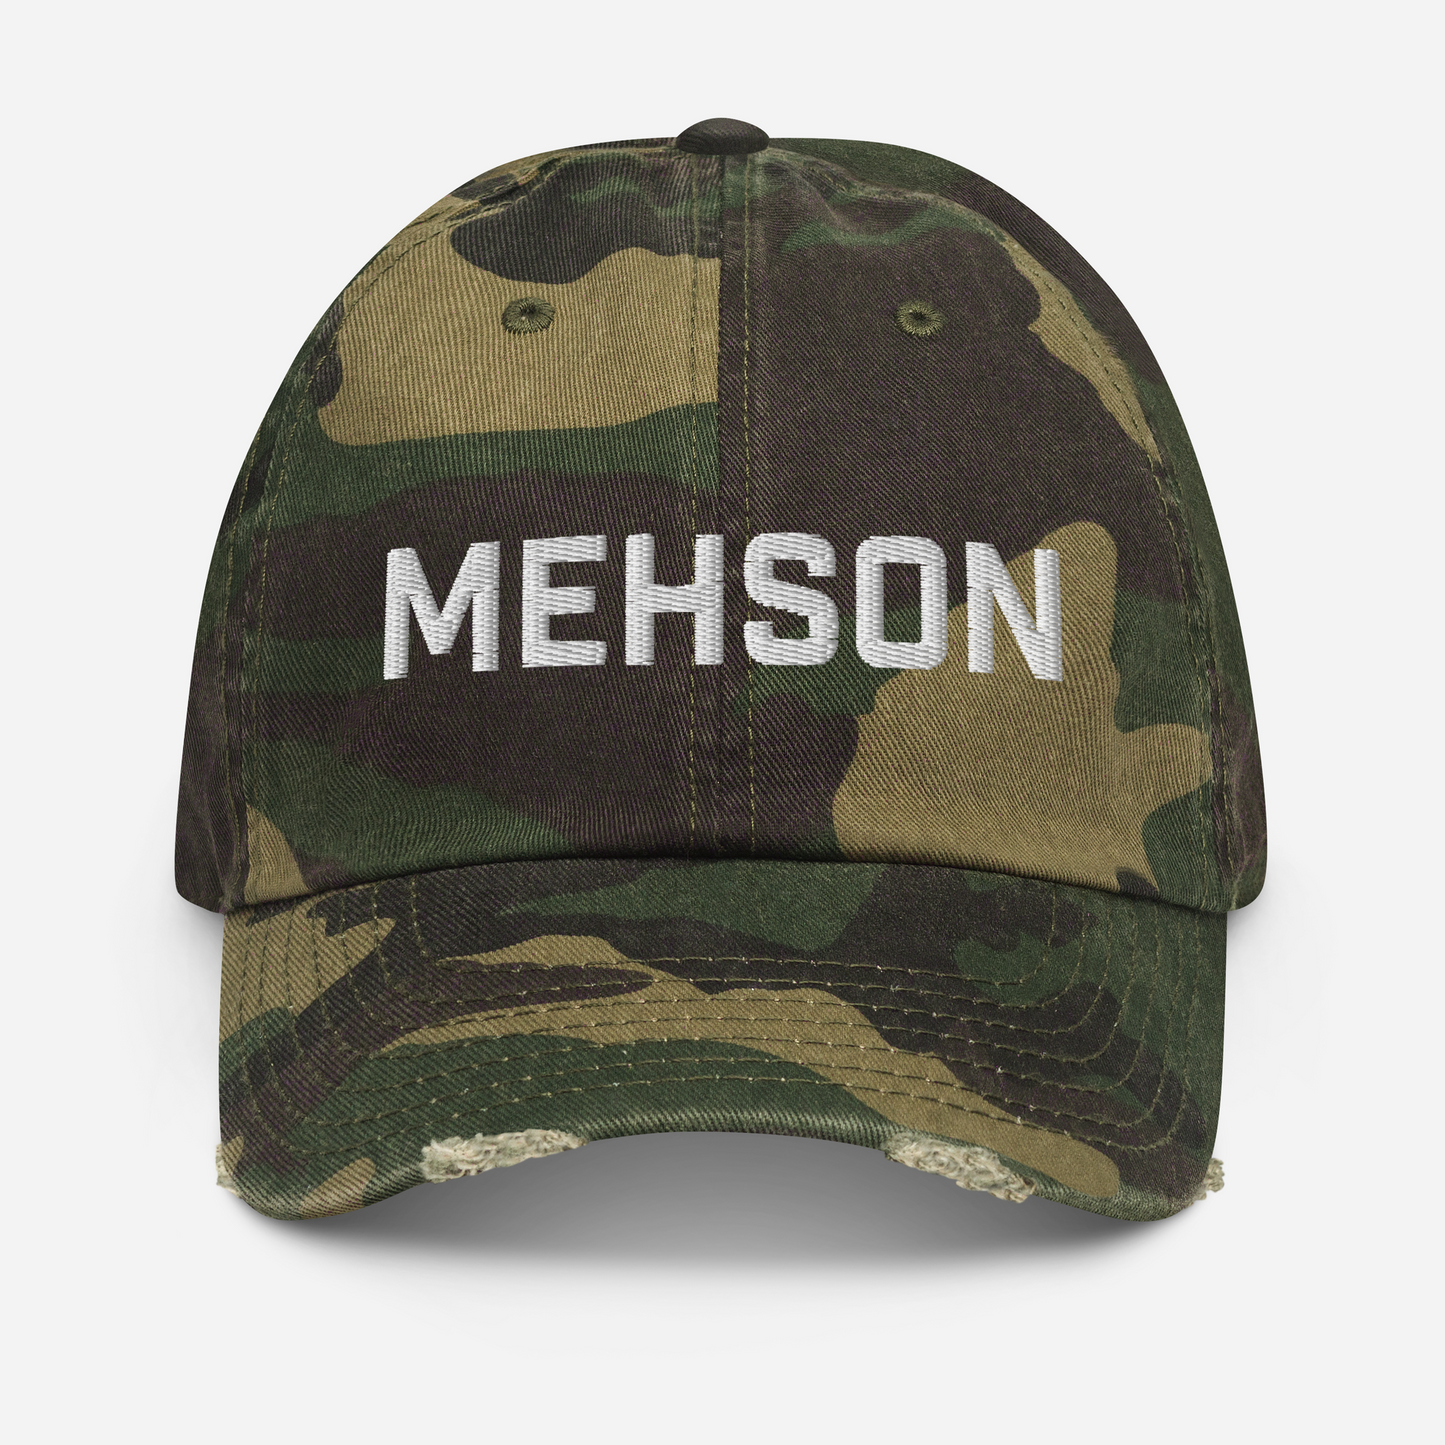 Mehson Distressed Dad Hat